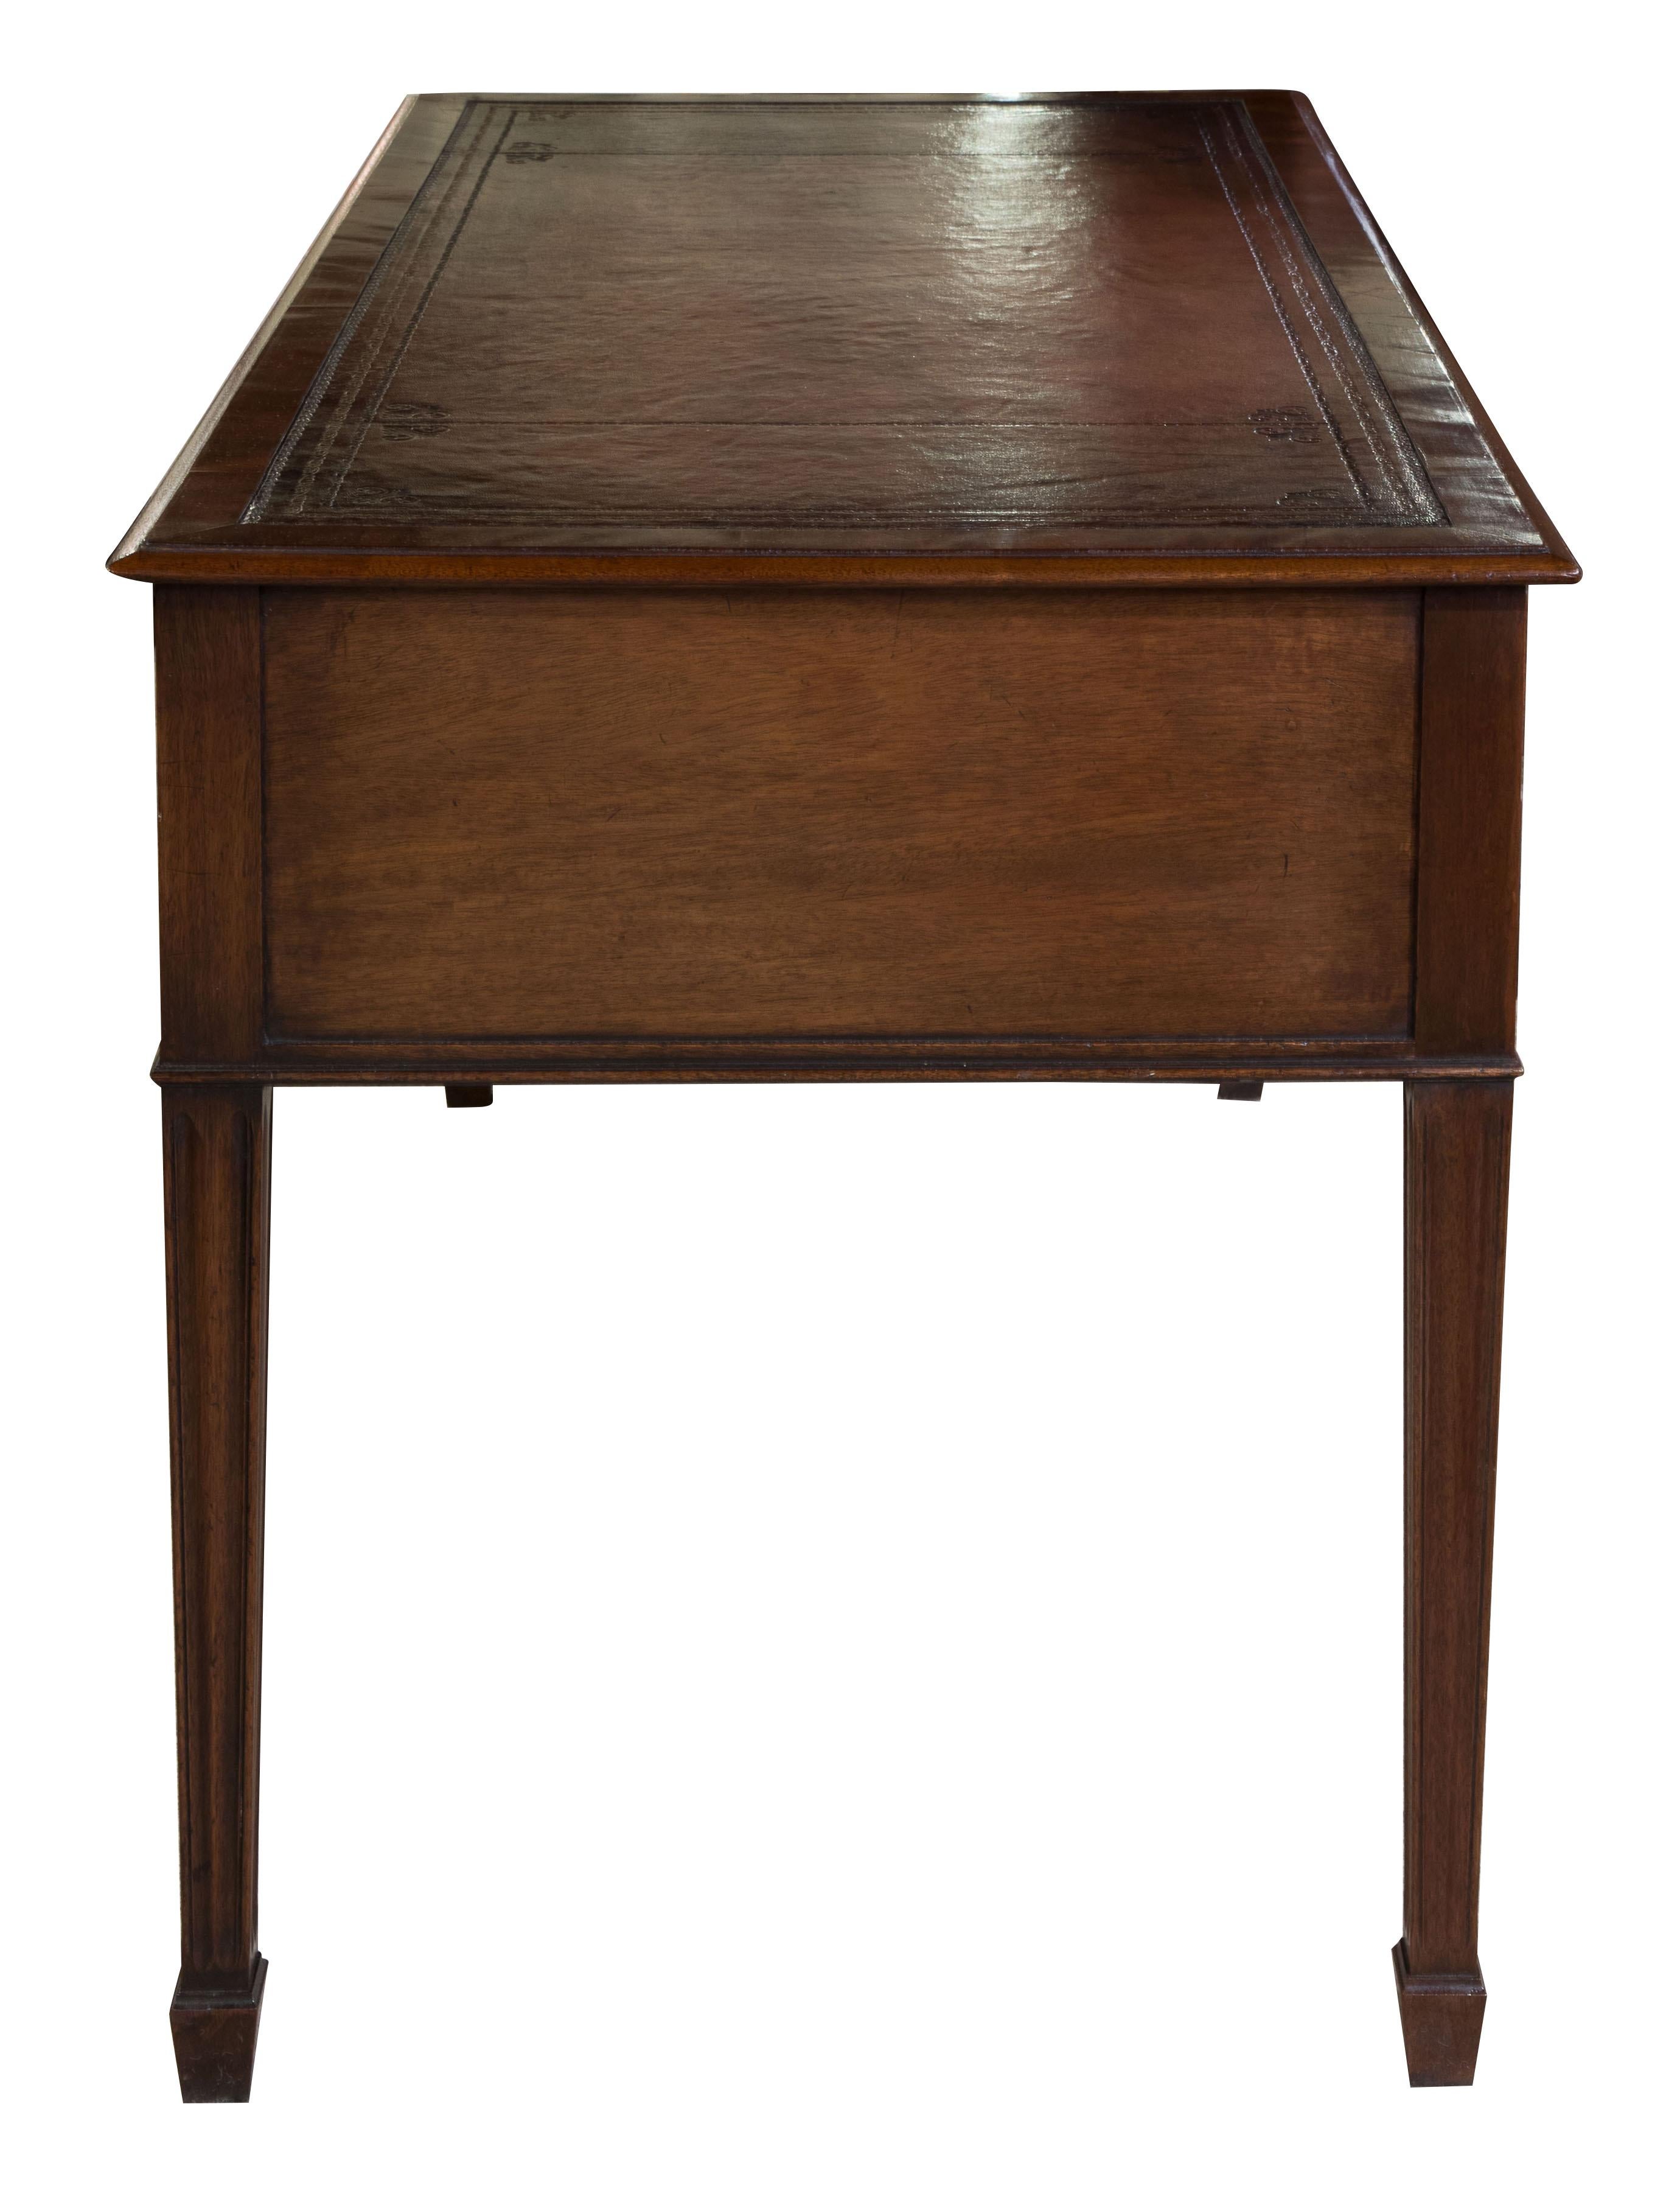 Good quality mahogany five-drawer writing table with antique wine leather top,
 

circa 1900.
         